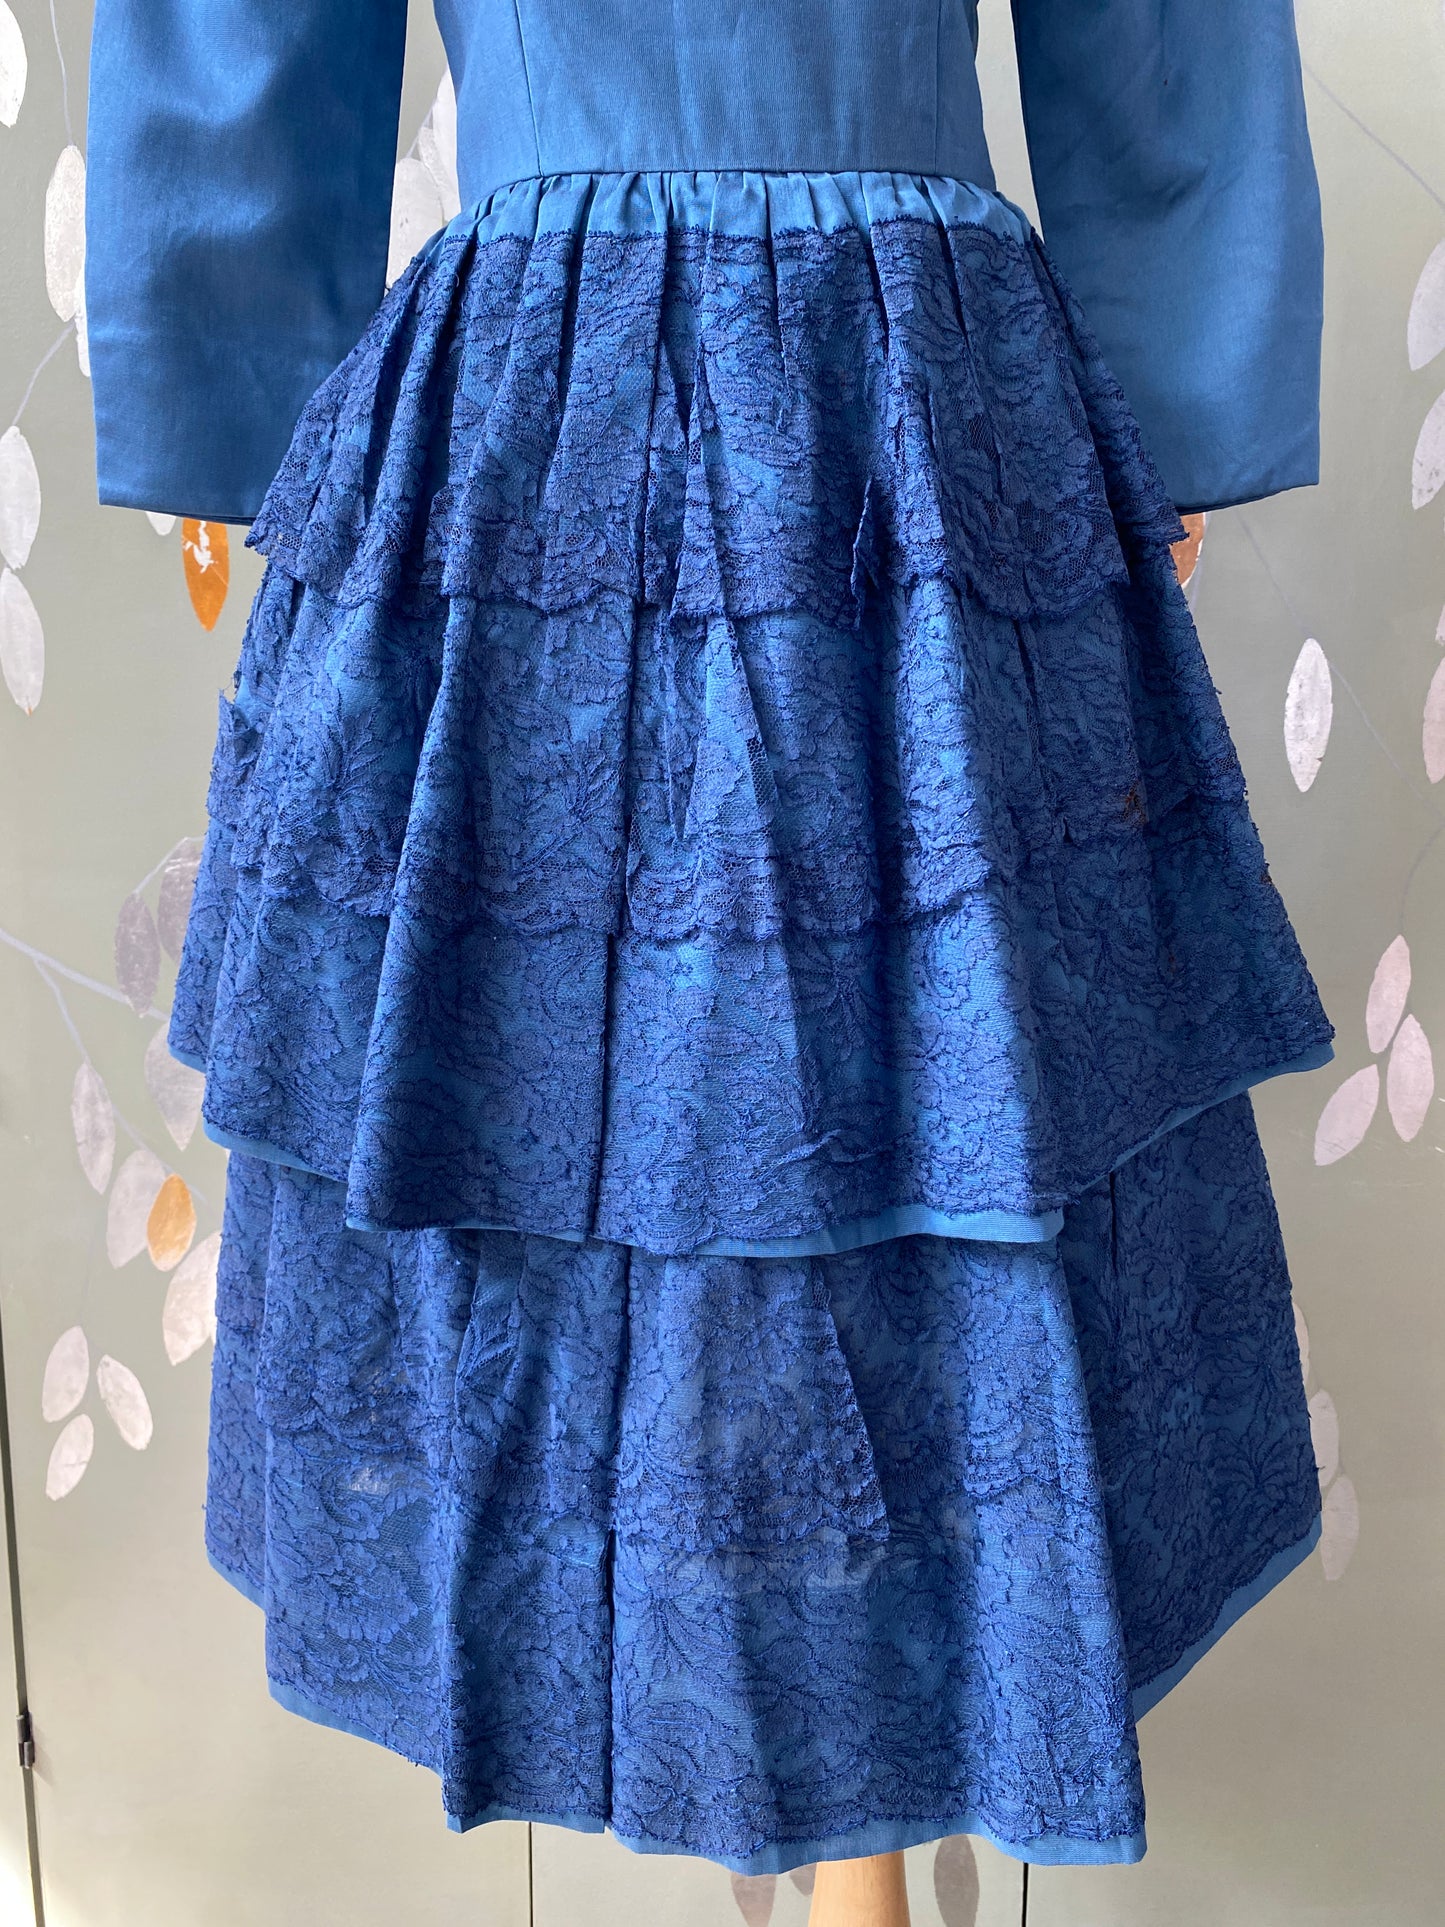 Vintage 1950s Blue Tiered Cocktail Dress, Small